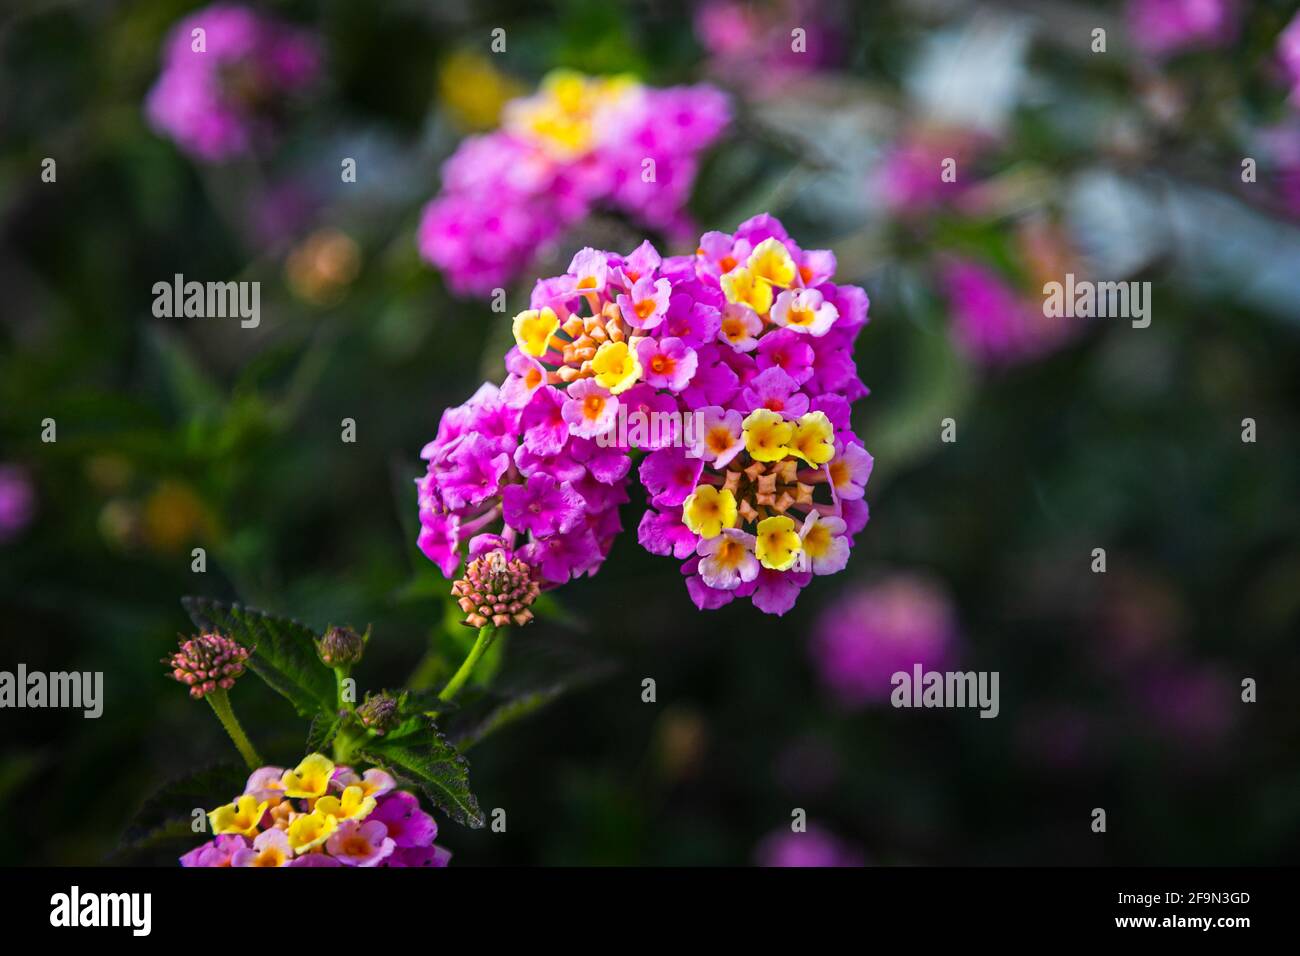 Close-up beautiful fresh  pink royal phlox flower on a background of green grass grows in a home garden, top view. Flowering garden flowers Stock Photo